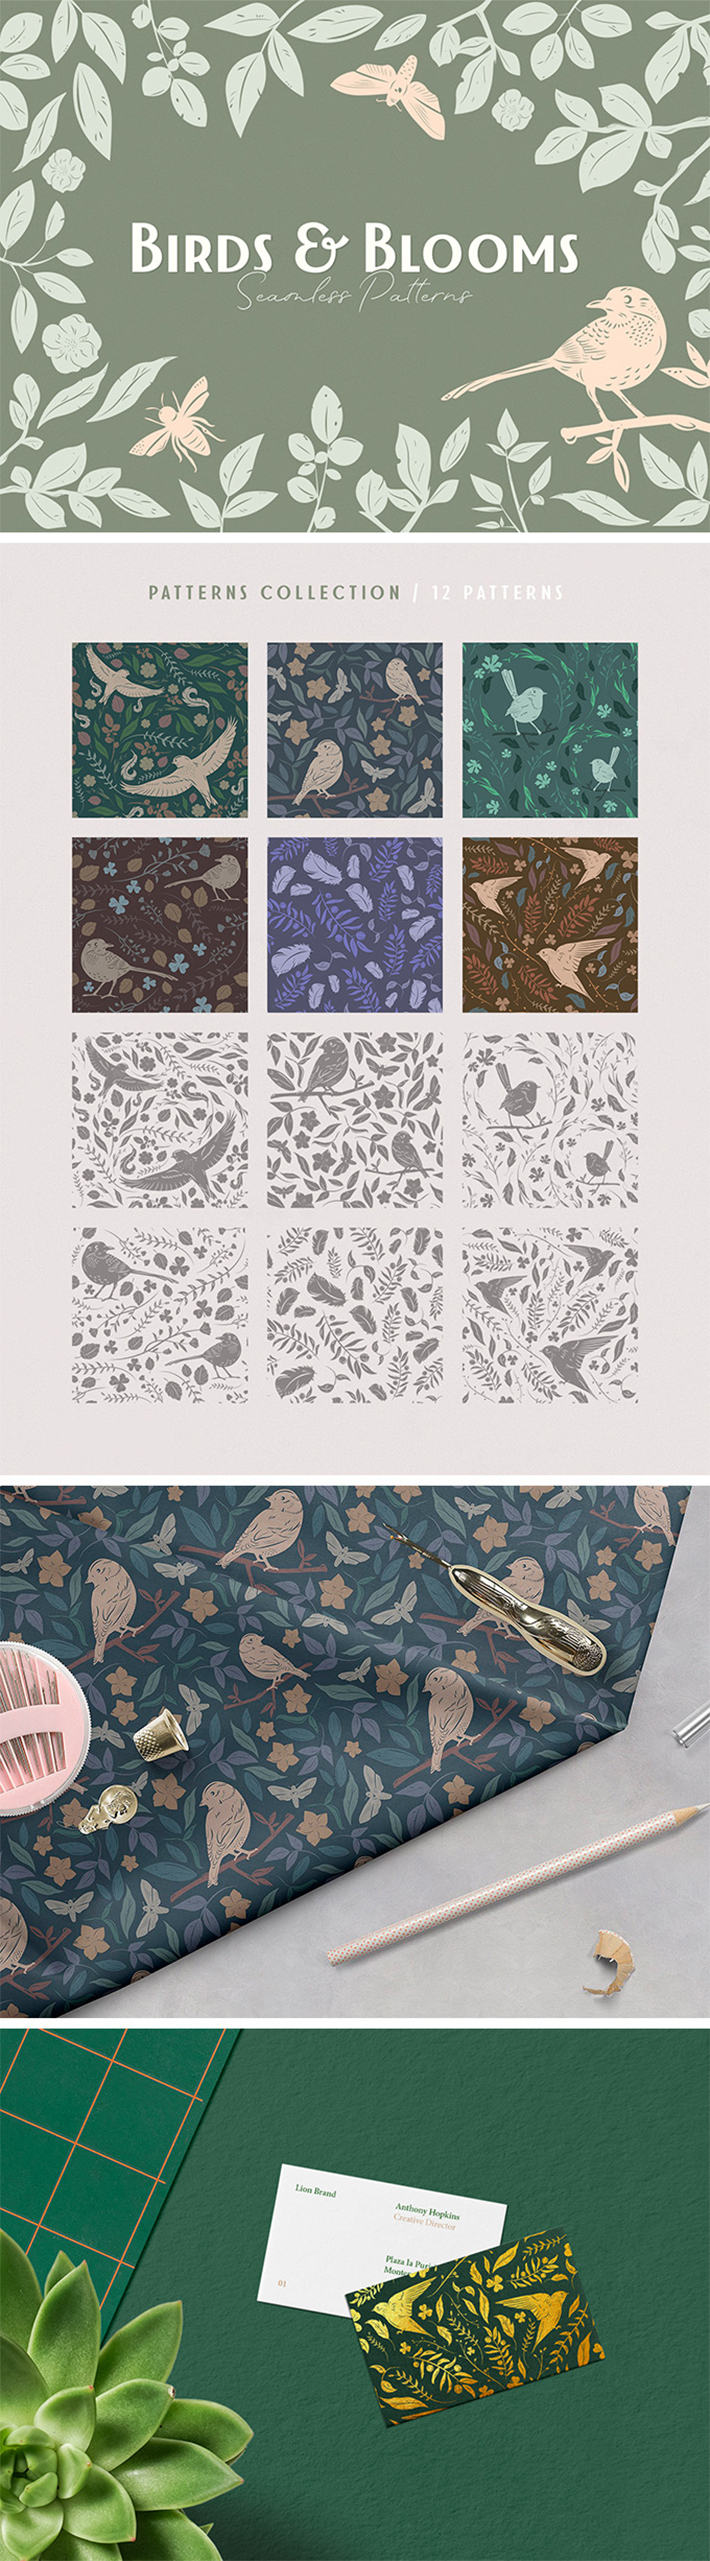 Awesome Birds & Blooms Seamless Patterns